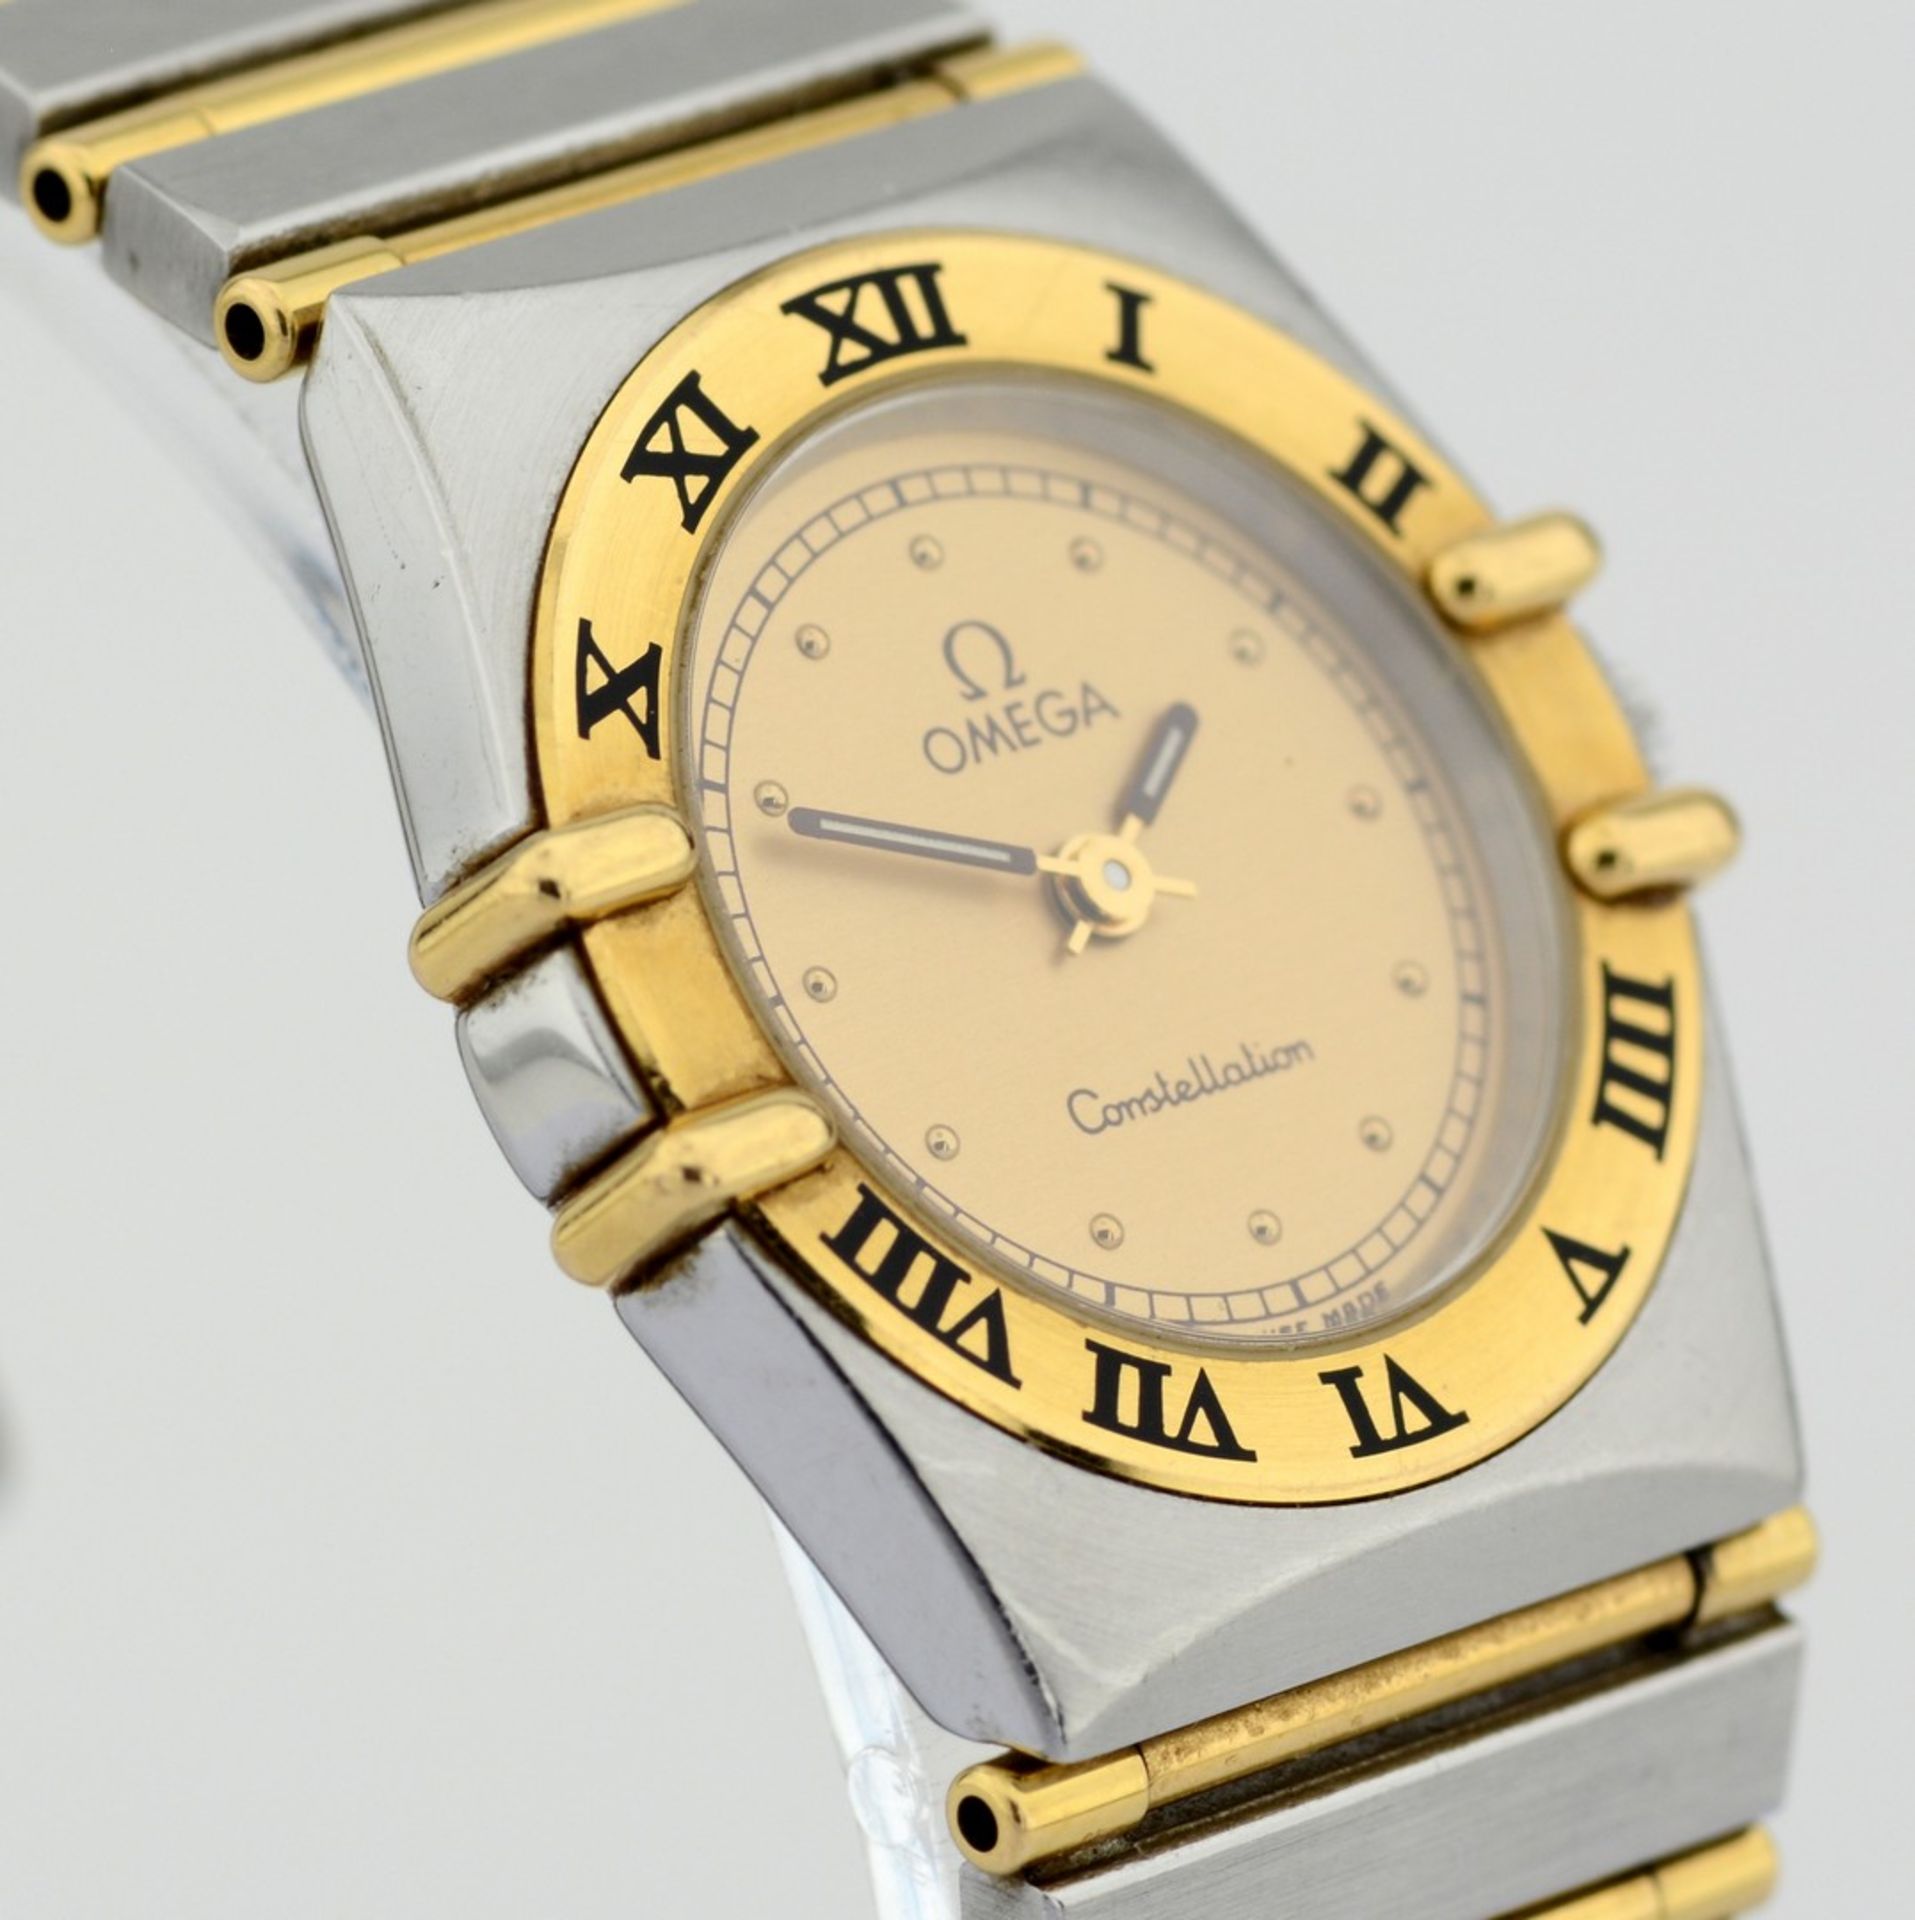 Omega / Constellation - Lady's Steel Wrist Watch - Image 5 of 7